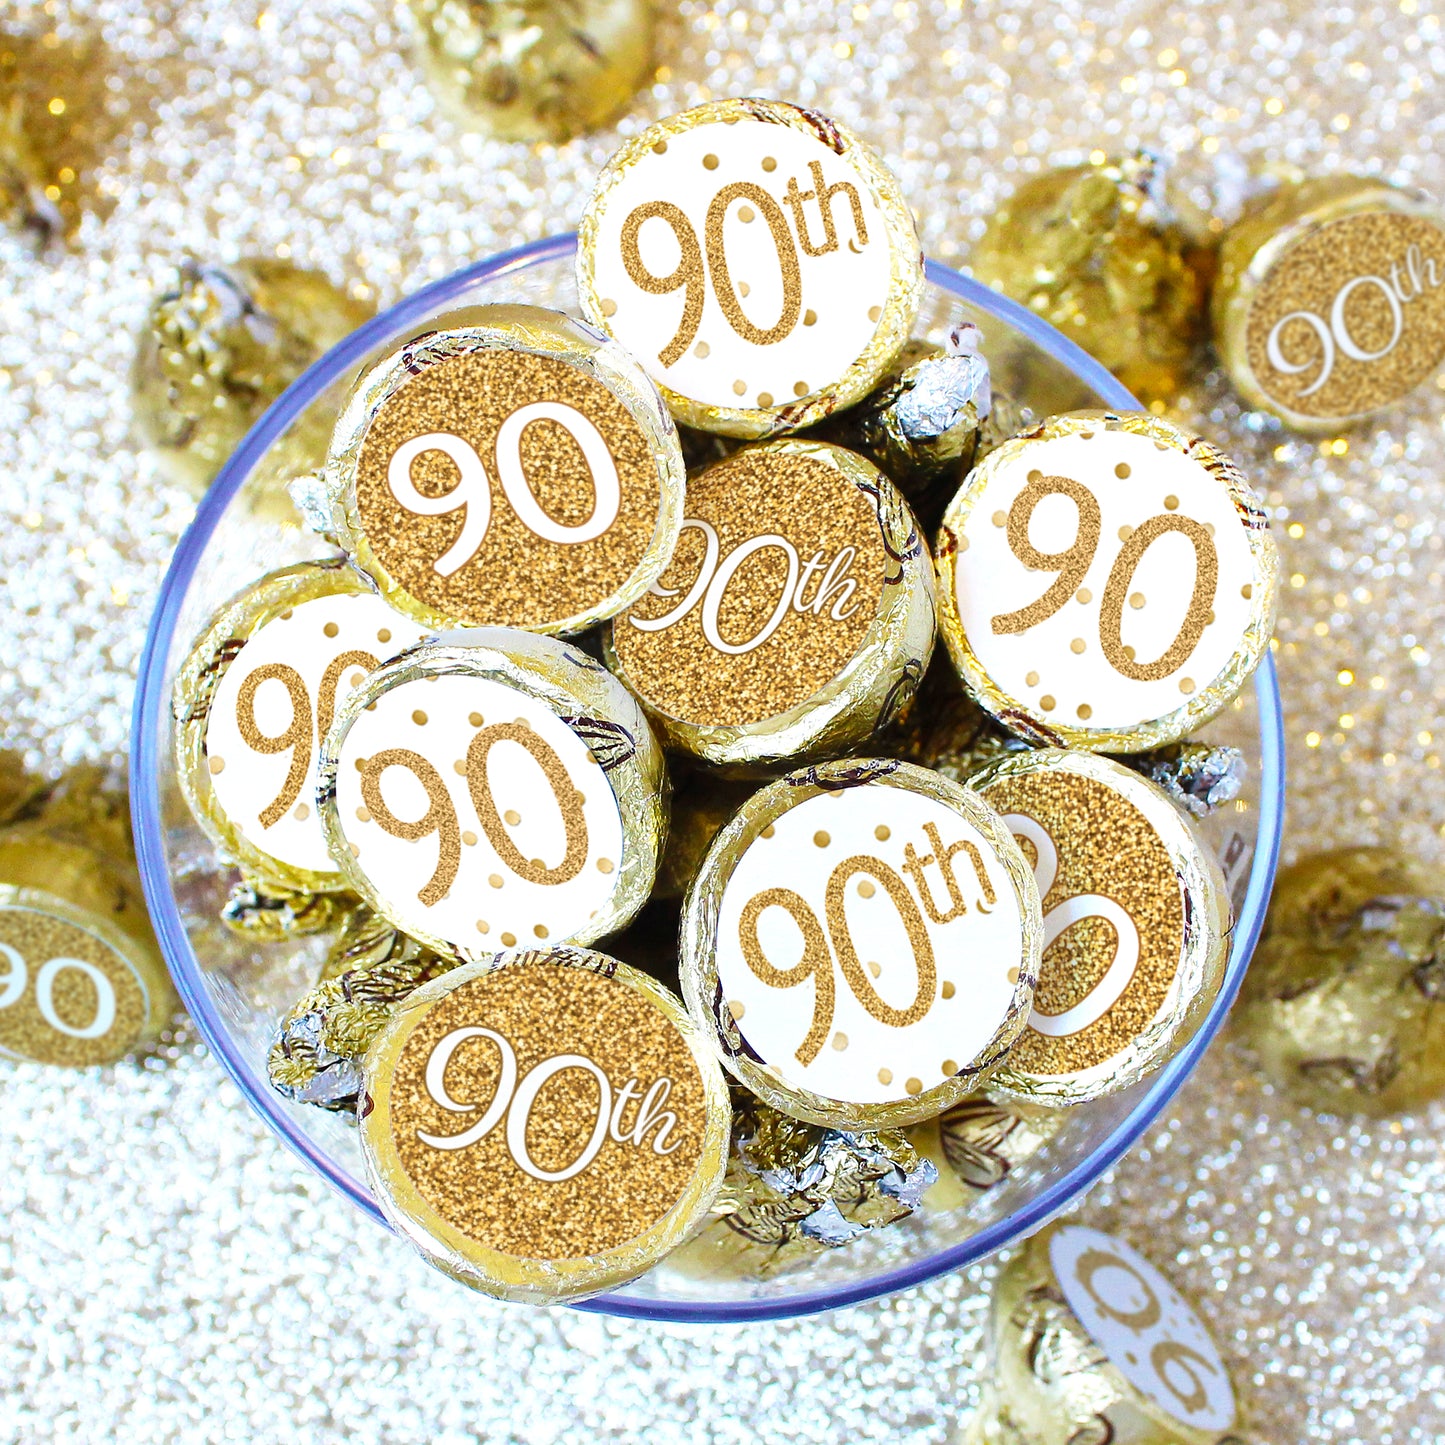 90th Birthday: White and Gold  - Party Favor Stickers - Fits on Hershey's Kisses - 180 Stickers